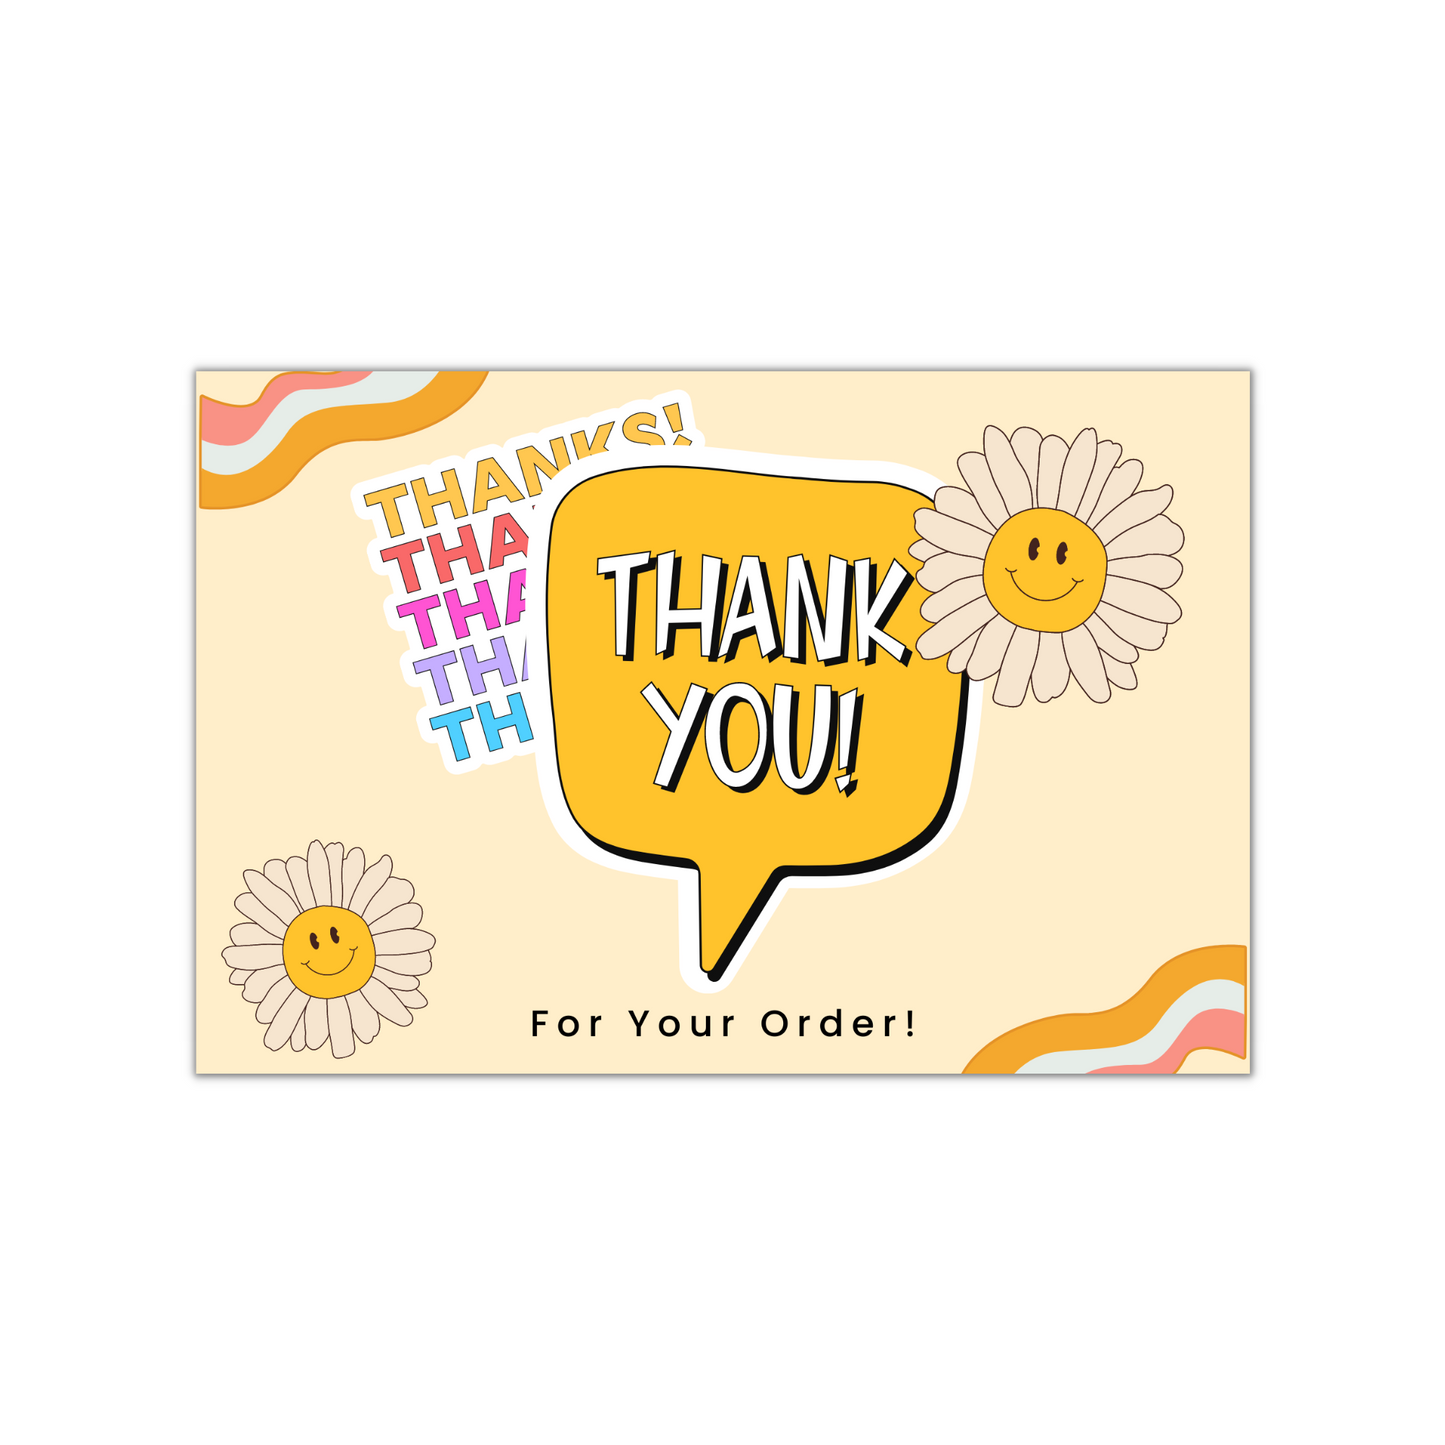 Thank You Post Cards